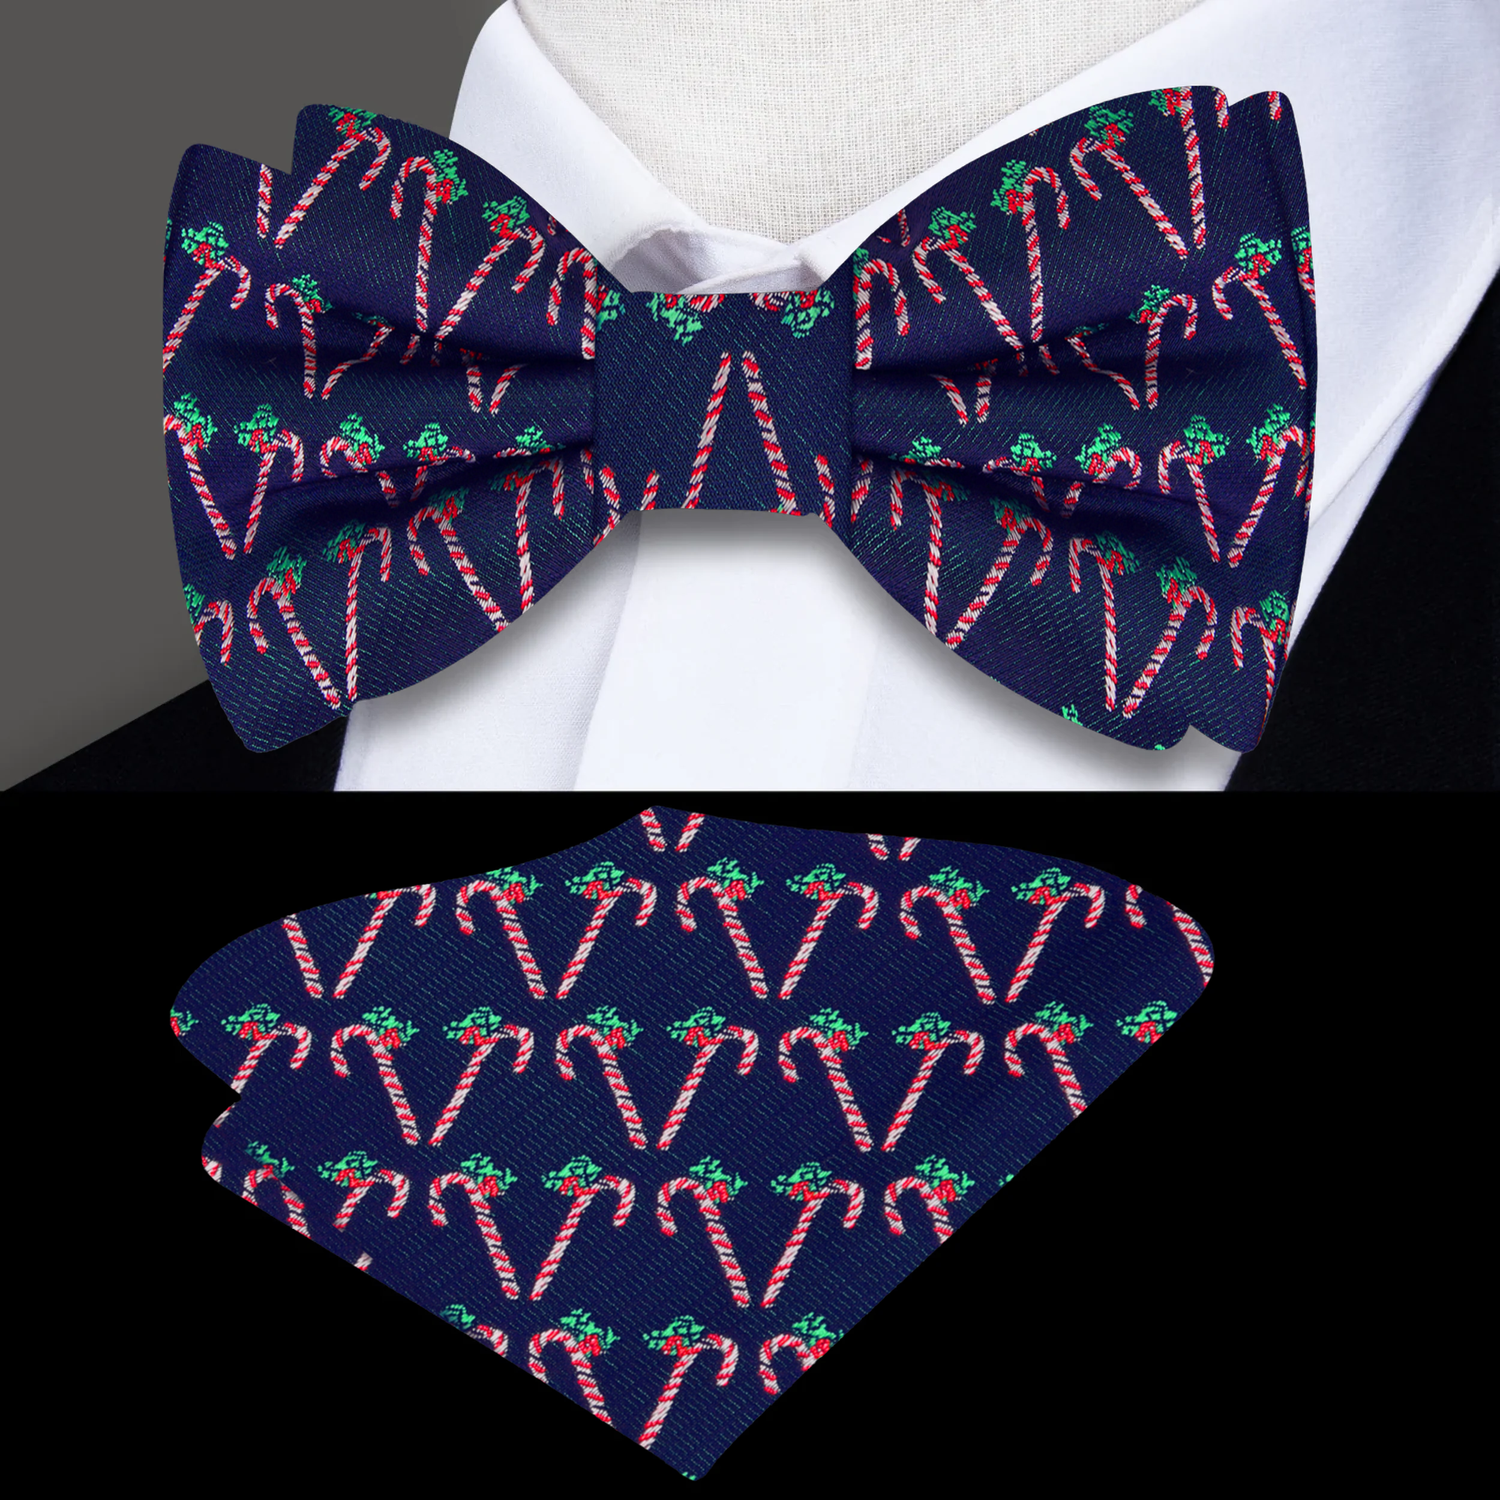 Blue with Red and Green Candy Canes Bow Tie and Square